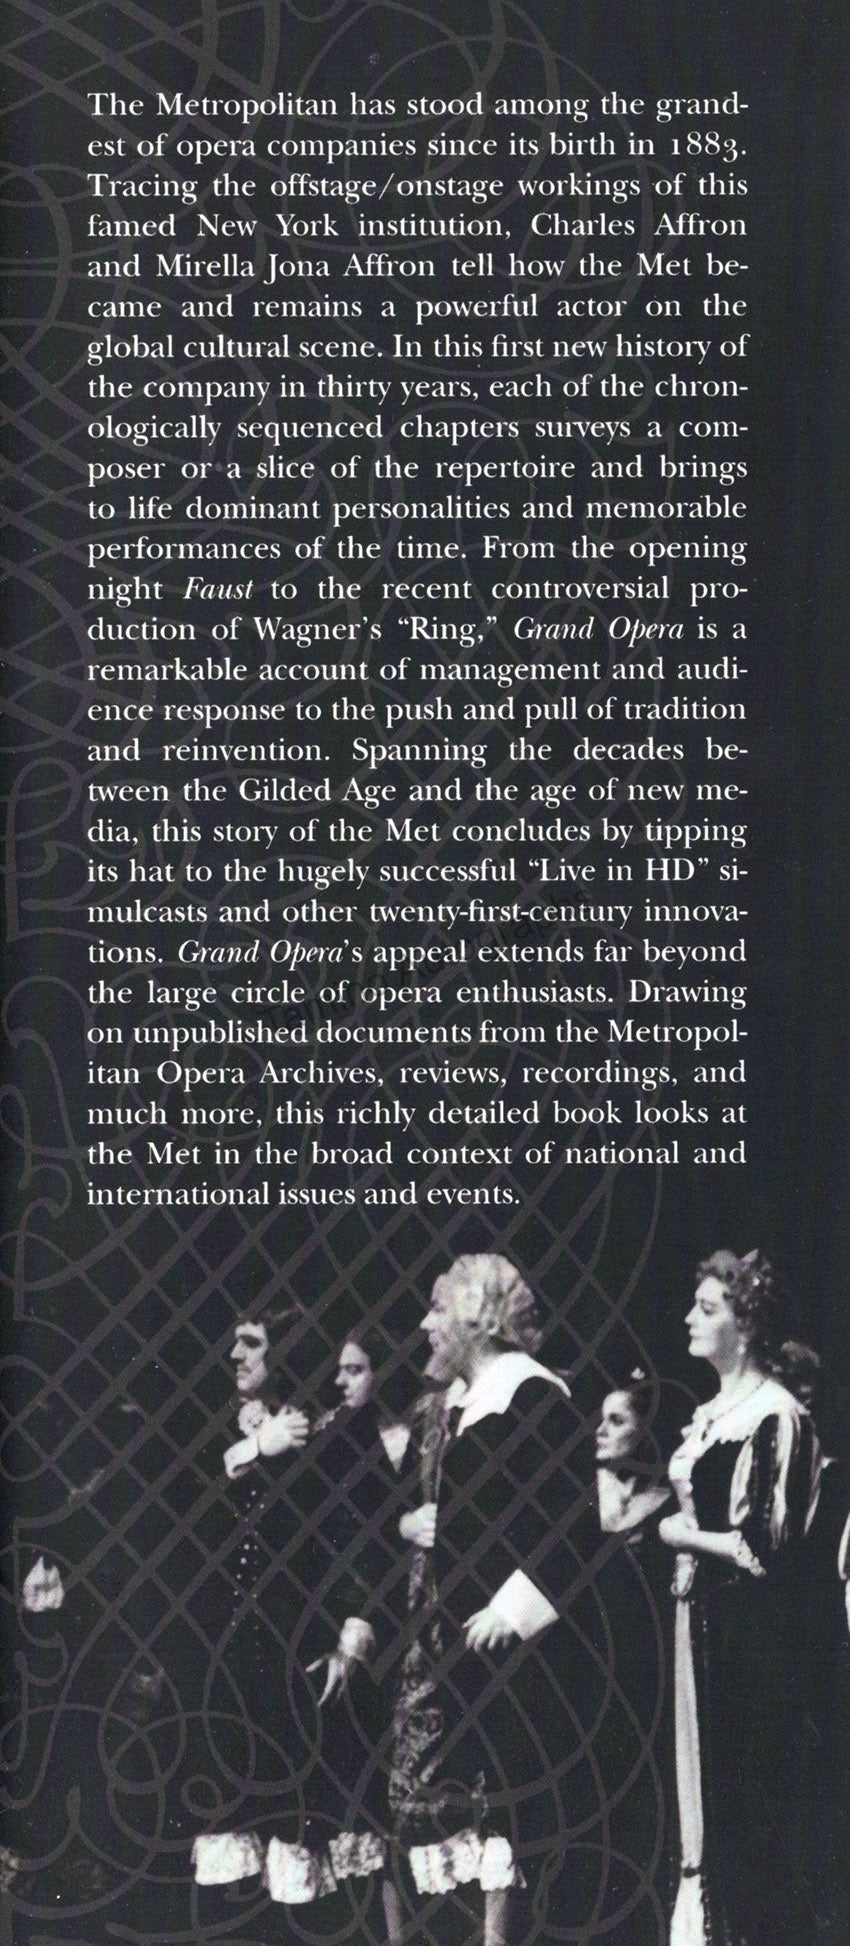 Grand Opera - The Story of the Met by Charles and Mirella Affron - tab